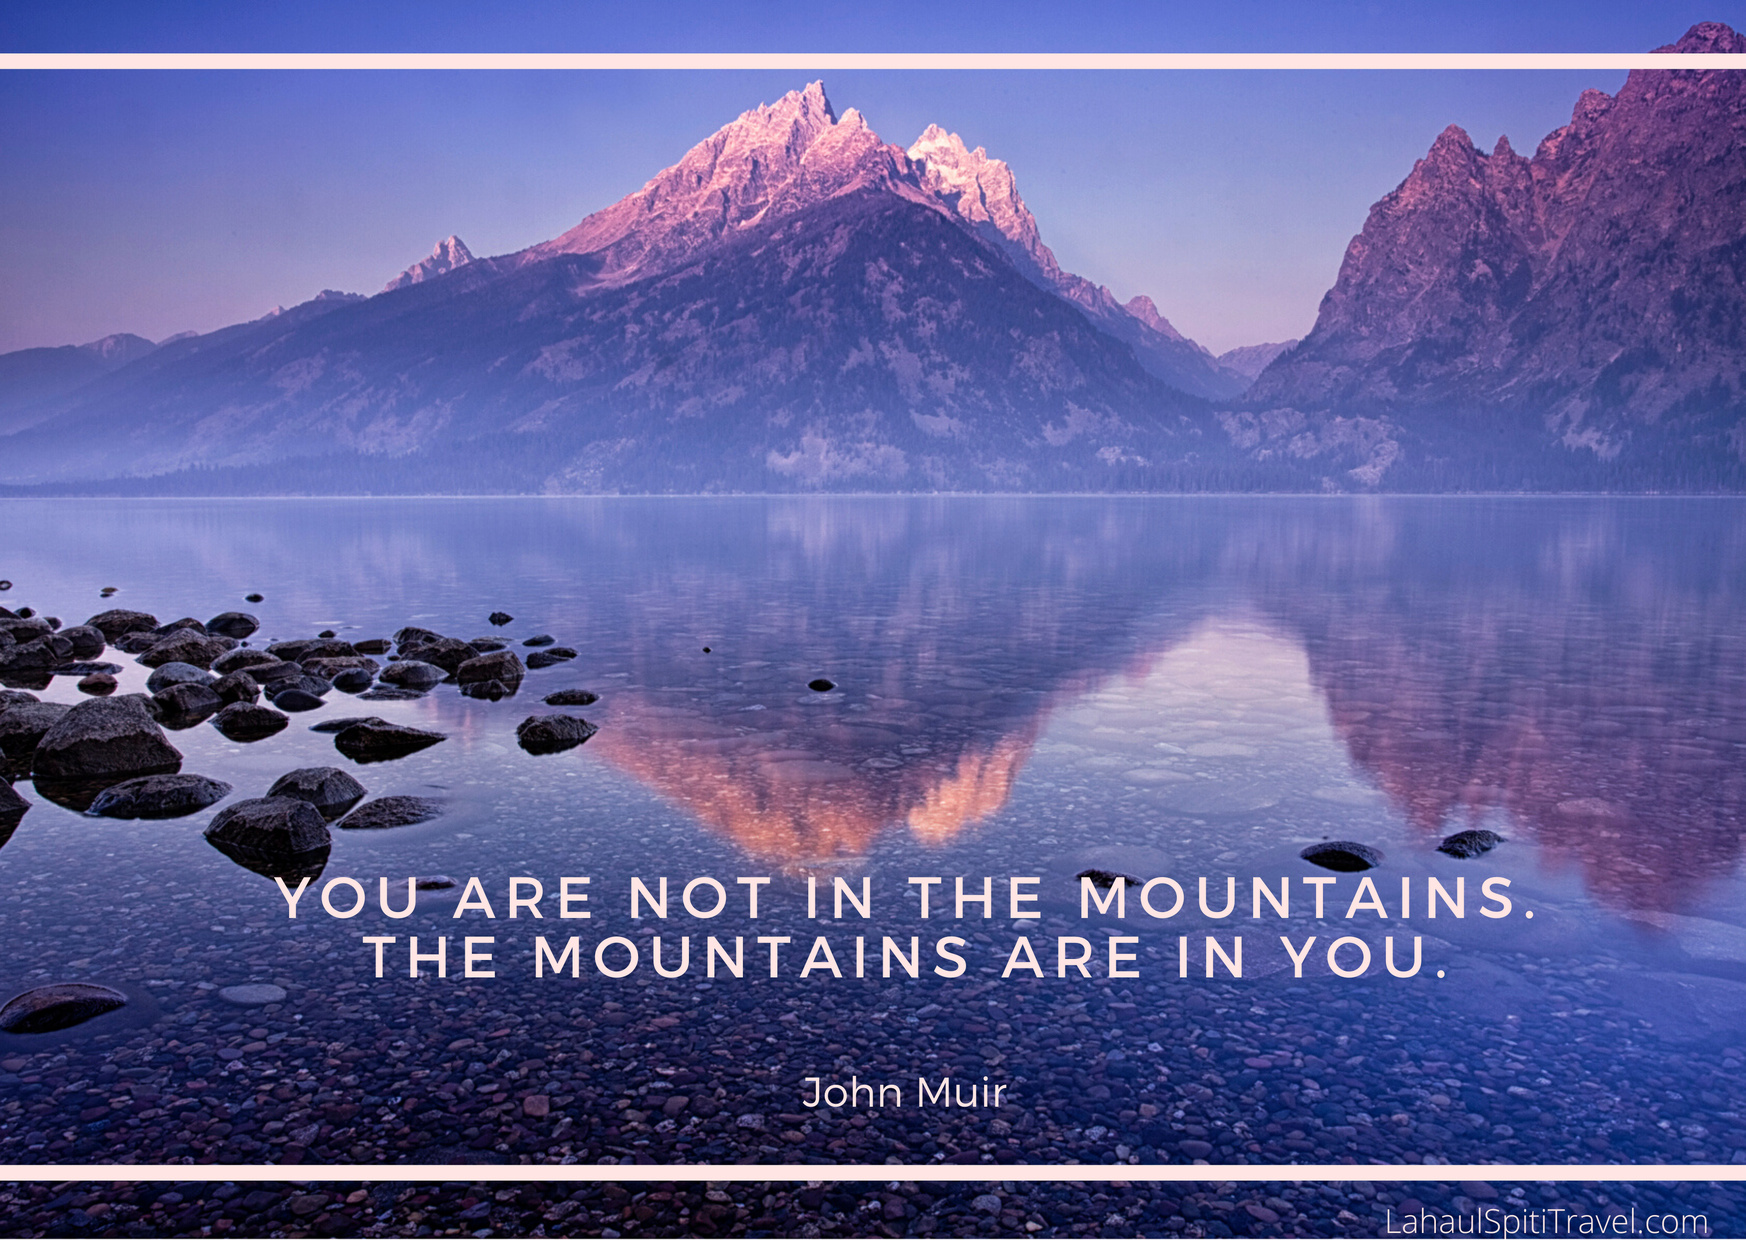 “You are not in the mountains. The mountains are in you.” -John Muir